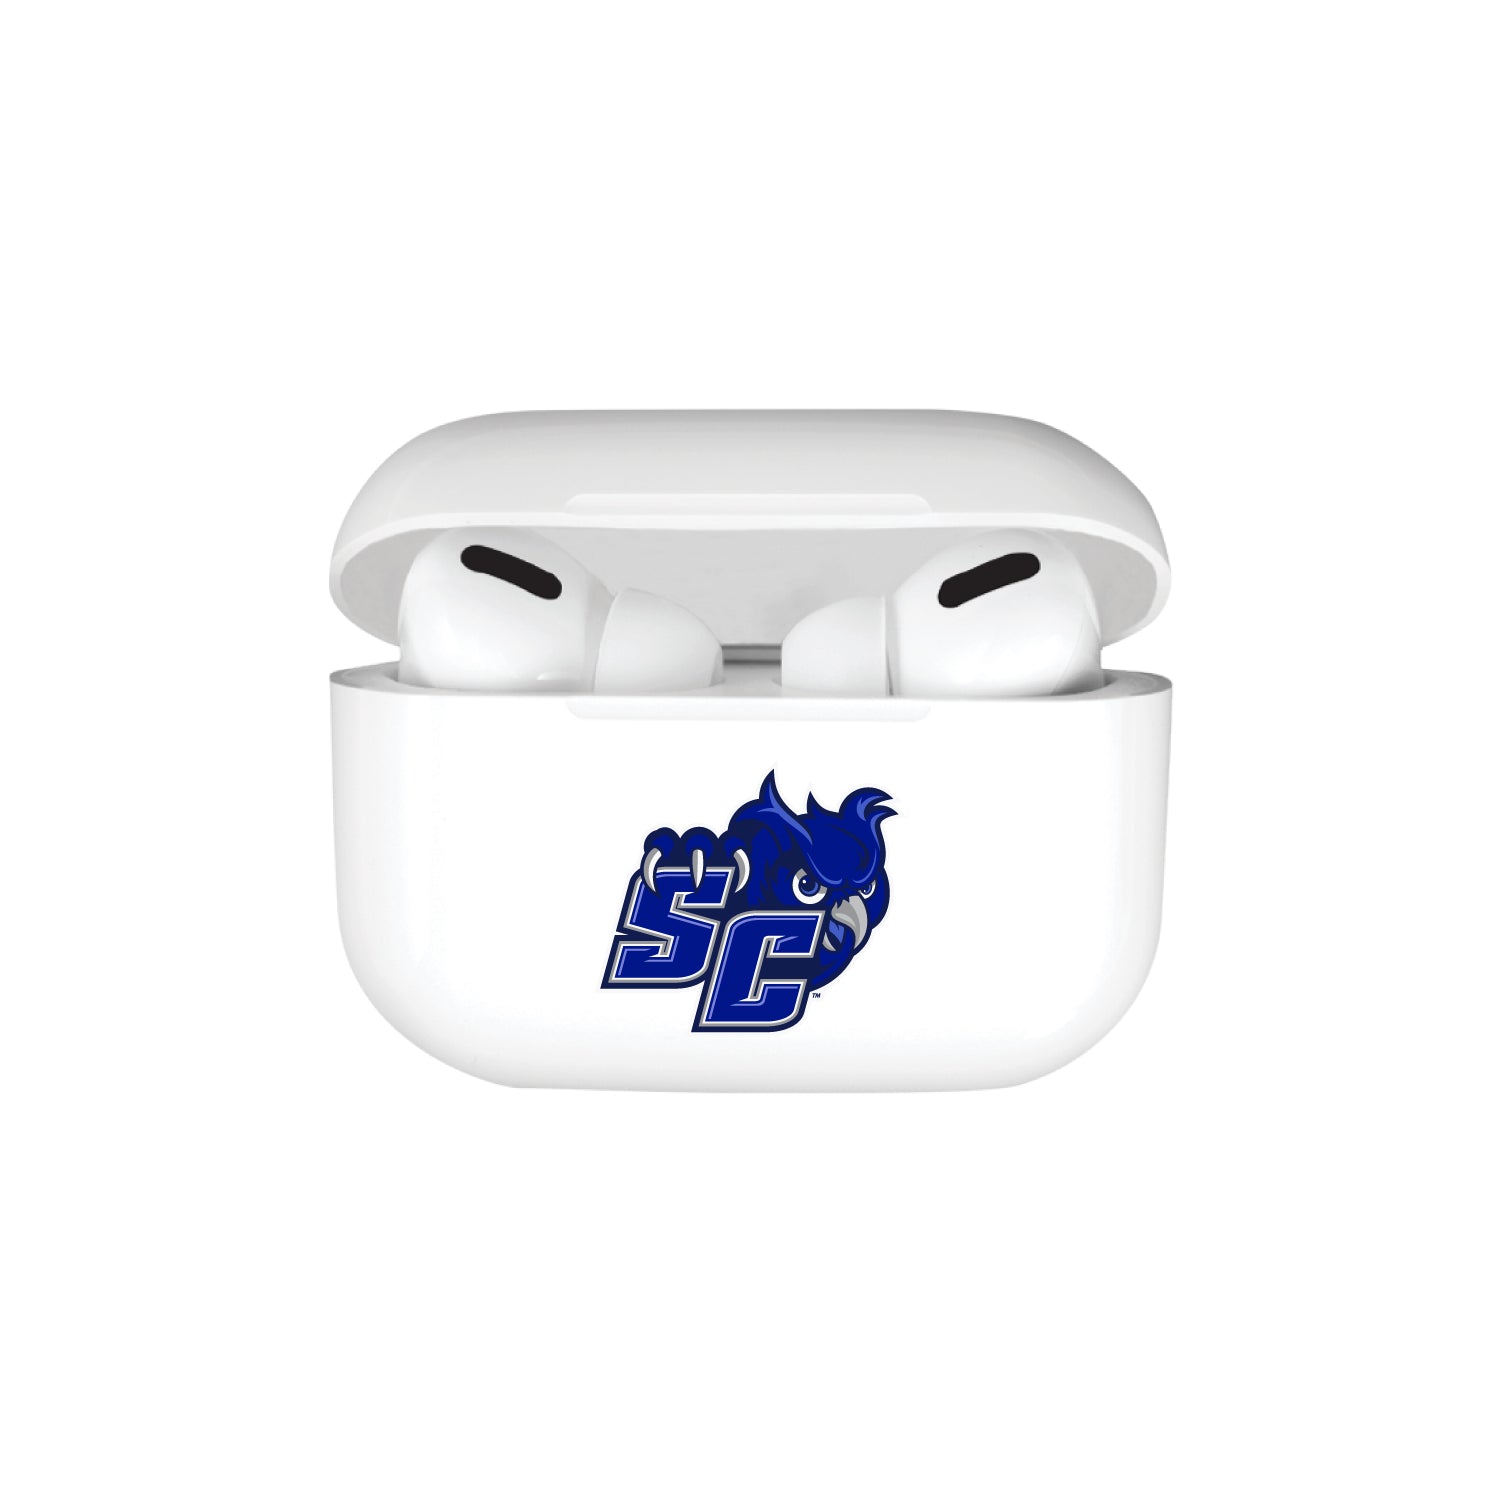 Southern Connecticut State Airpods Case